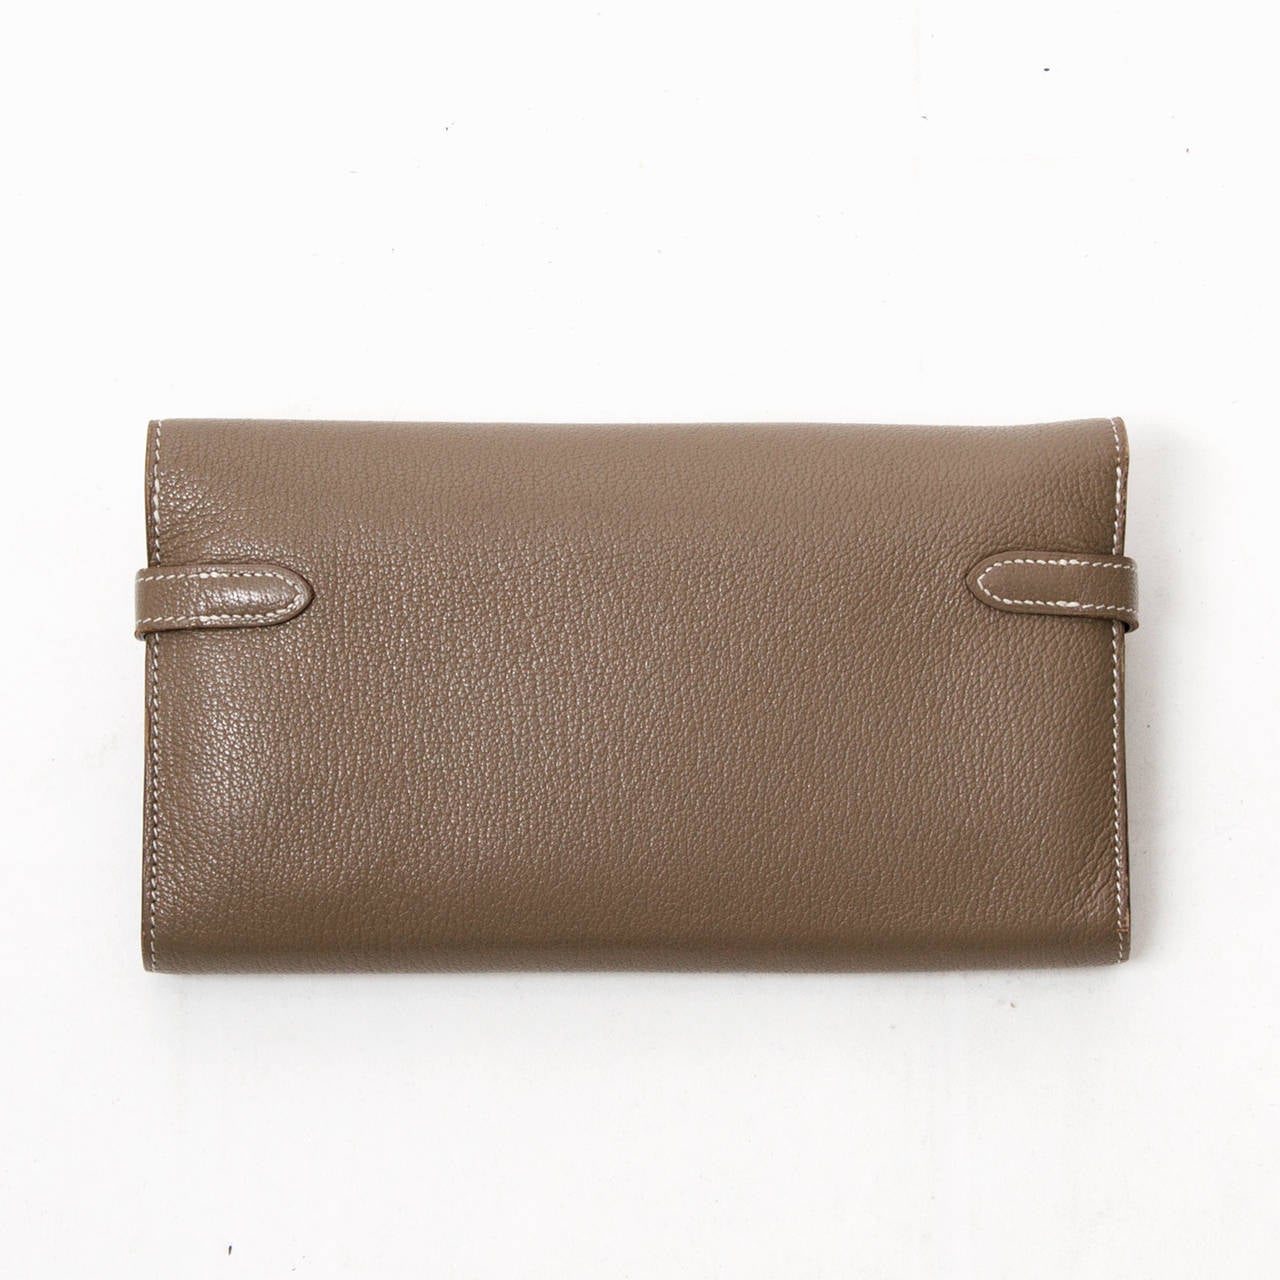 Superb Hermes Kelly Long wallet that is often carried as a clutch.  
Features 12 credit card slots, large coin zippered pocket
2 pocket for bills and a large notes pocket. 
The wallet will be shipped with its box and ribbon.